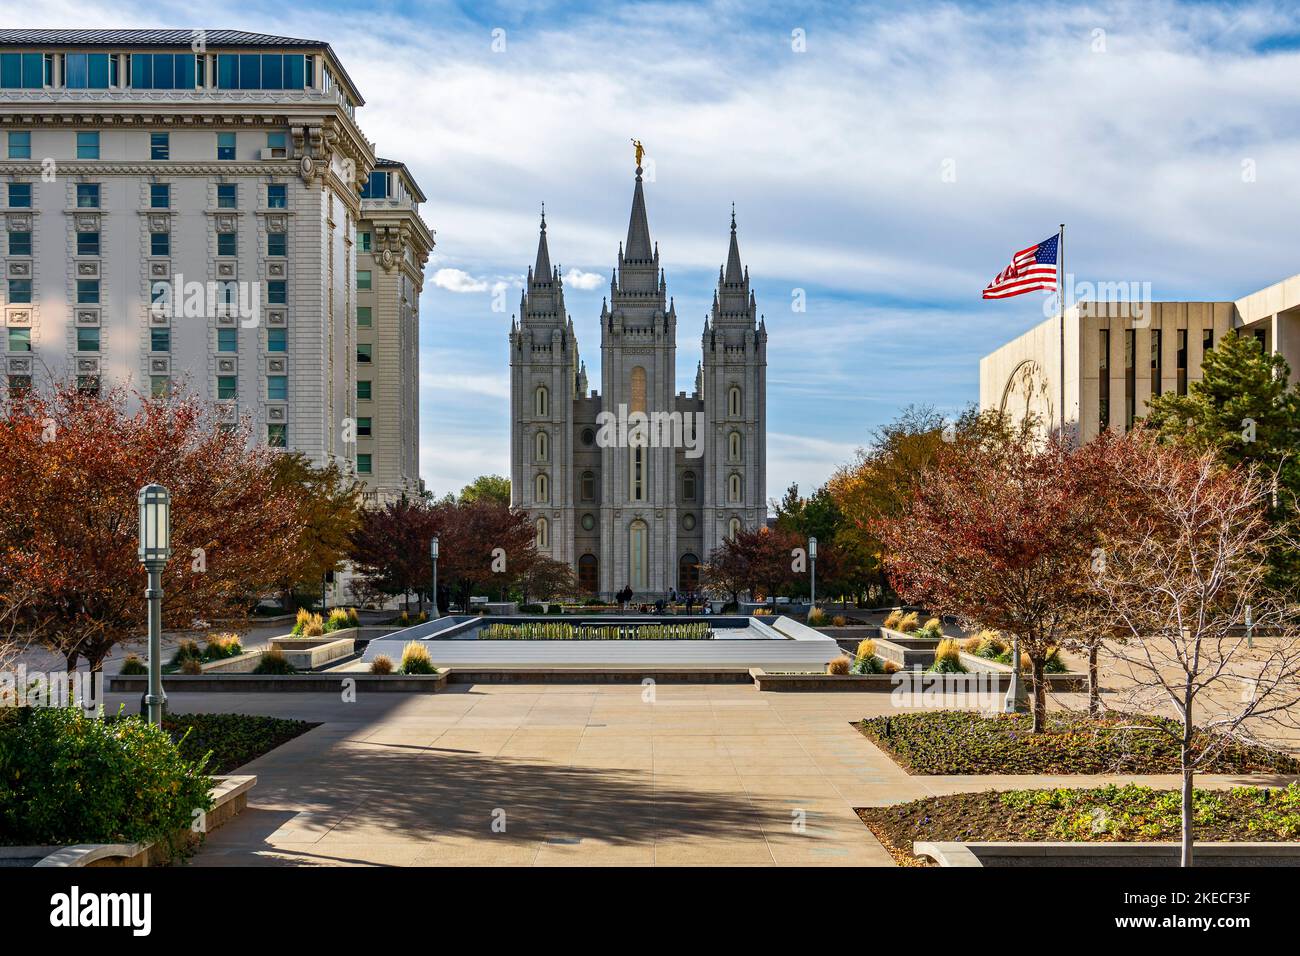 The Salt Lake Temple is the most famous and largest temple of the Church of Jesus Christ of Latter-day Saints. The building is constructed in various styles of historicism and is located in Salt Lake City, the capital of the US state of Utah. Stock Photo